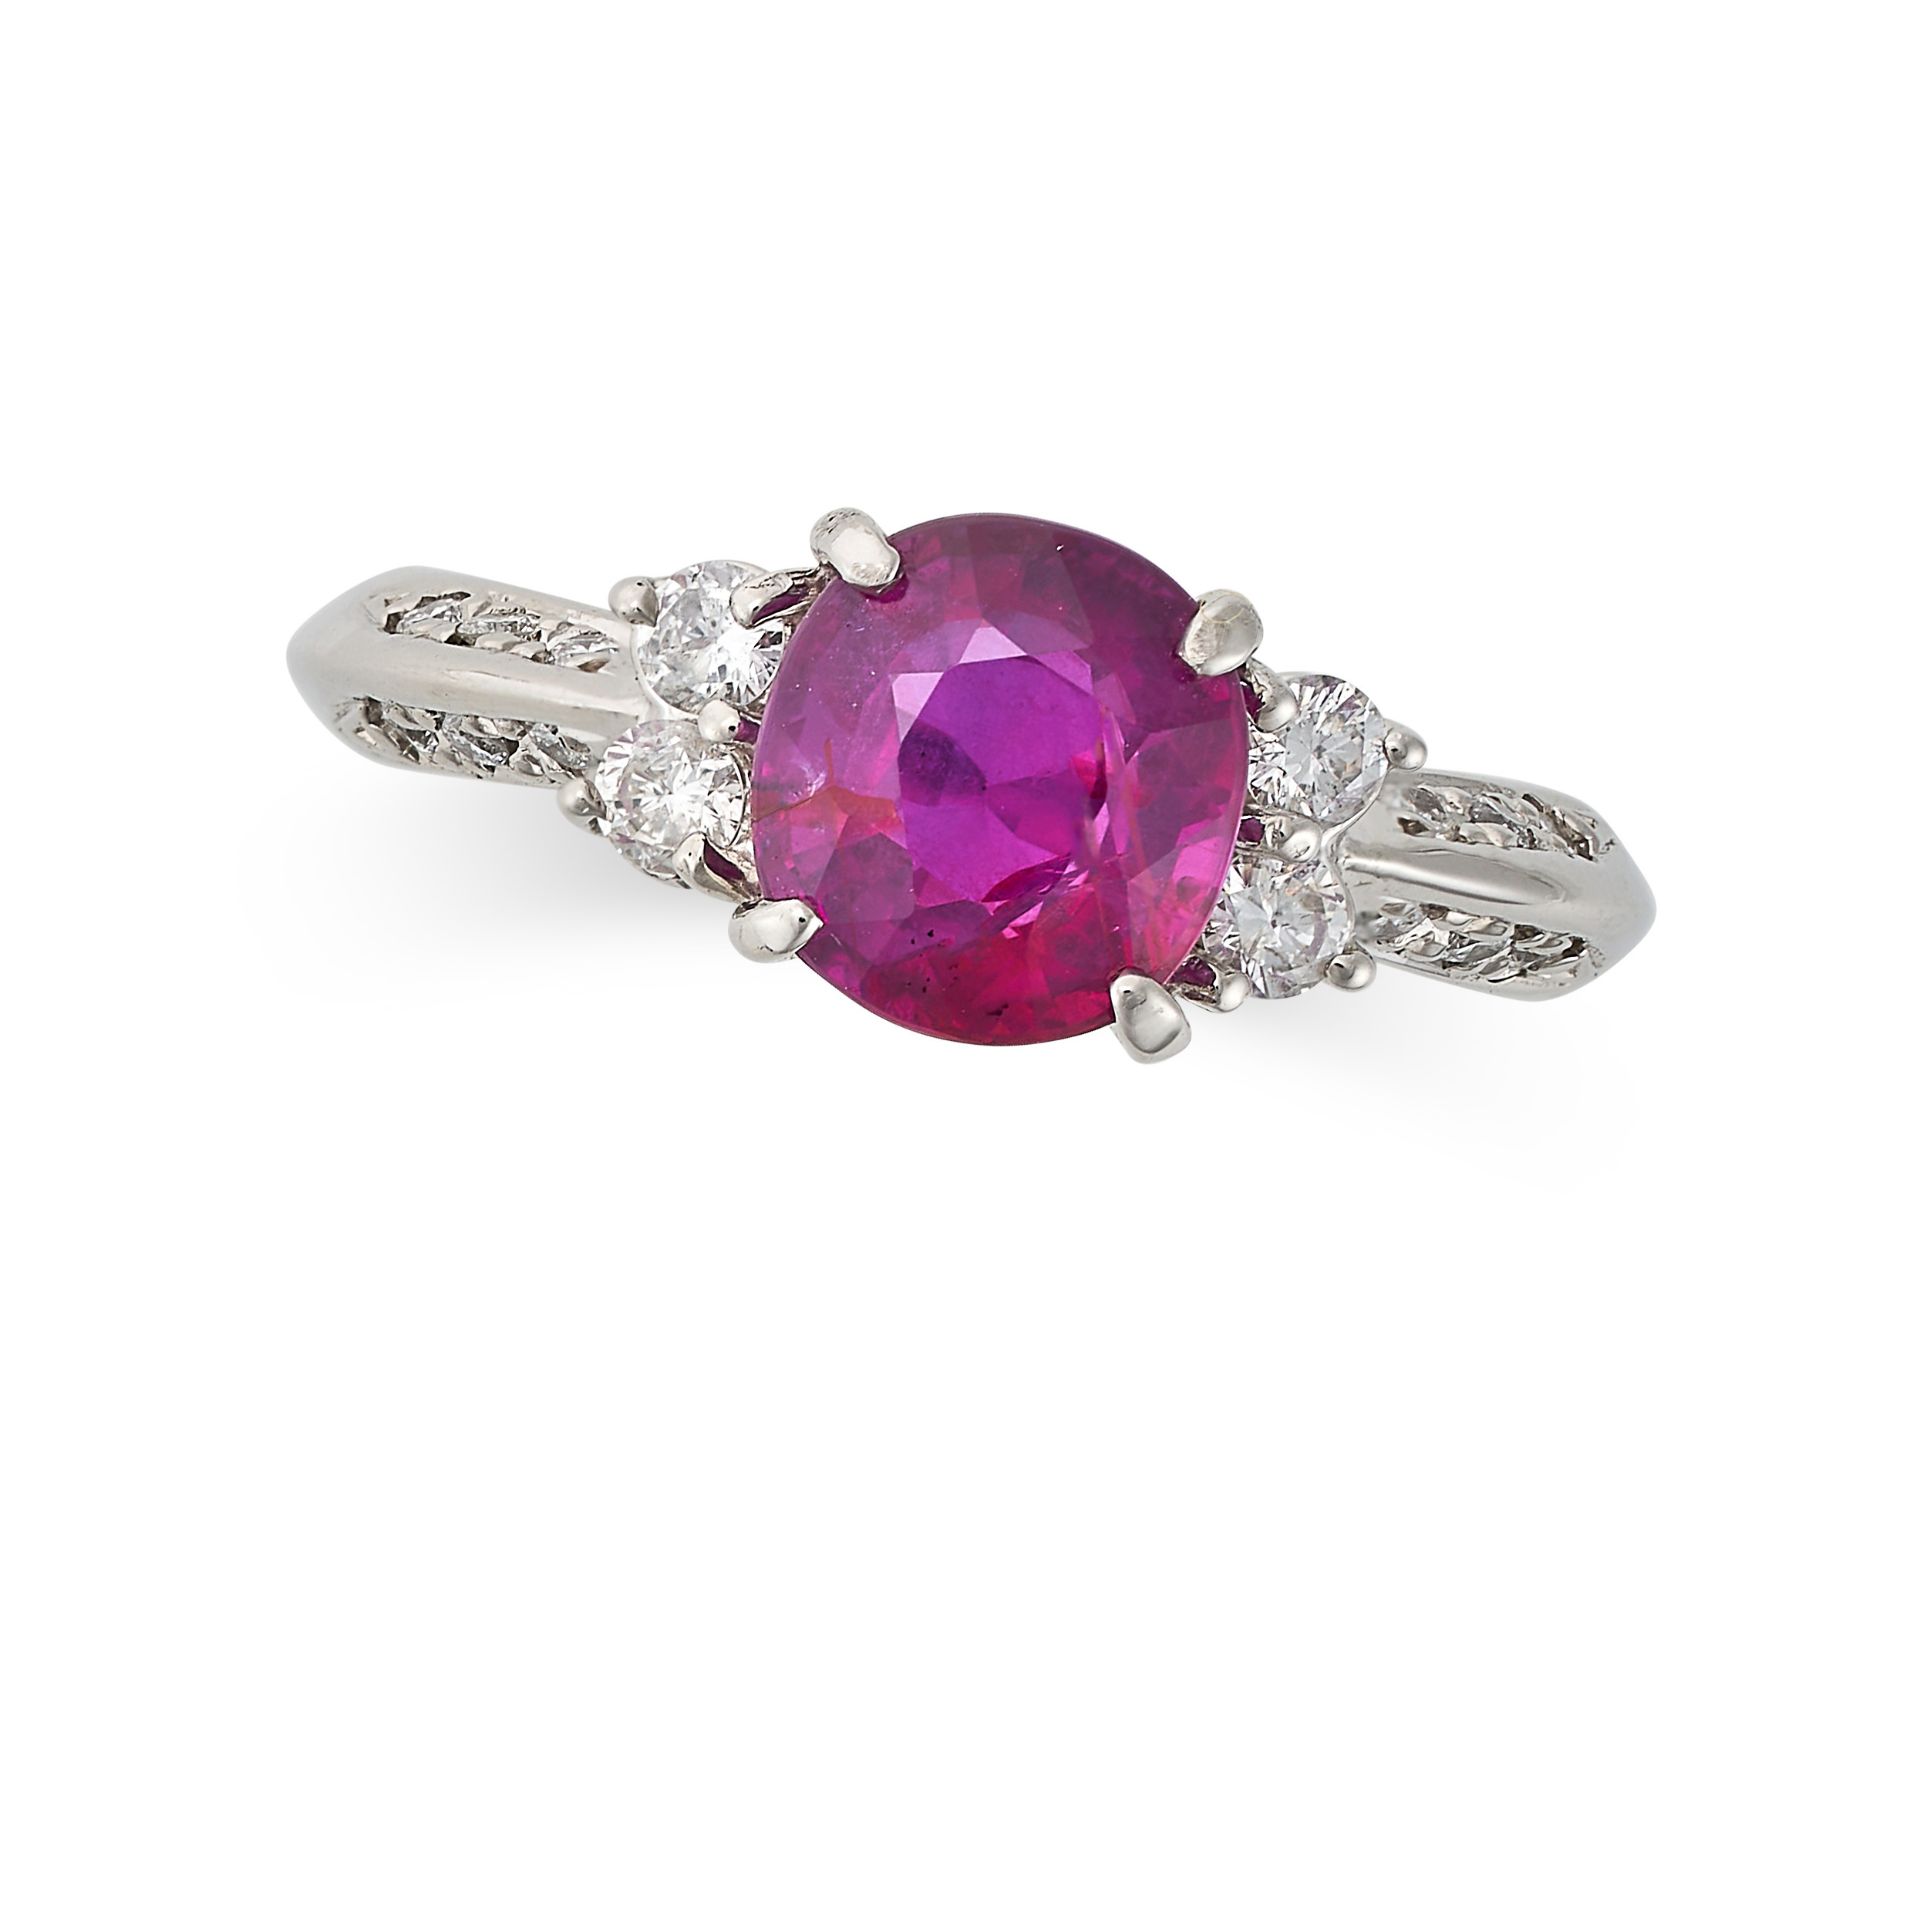 AN UNHEATED RUBY AND DIAMOND RING in platinum, set with an oval cut ruby of 2.16 carats accented ... - Image 2 of 4